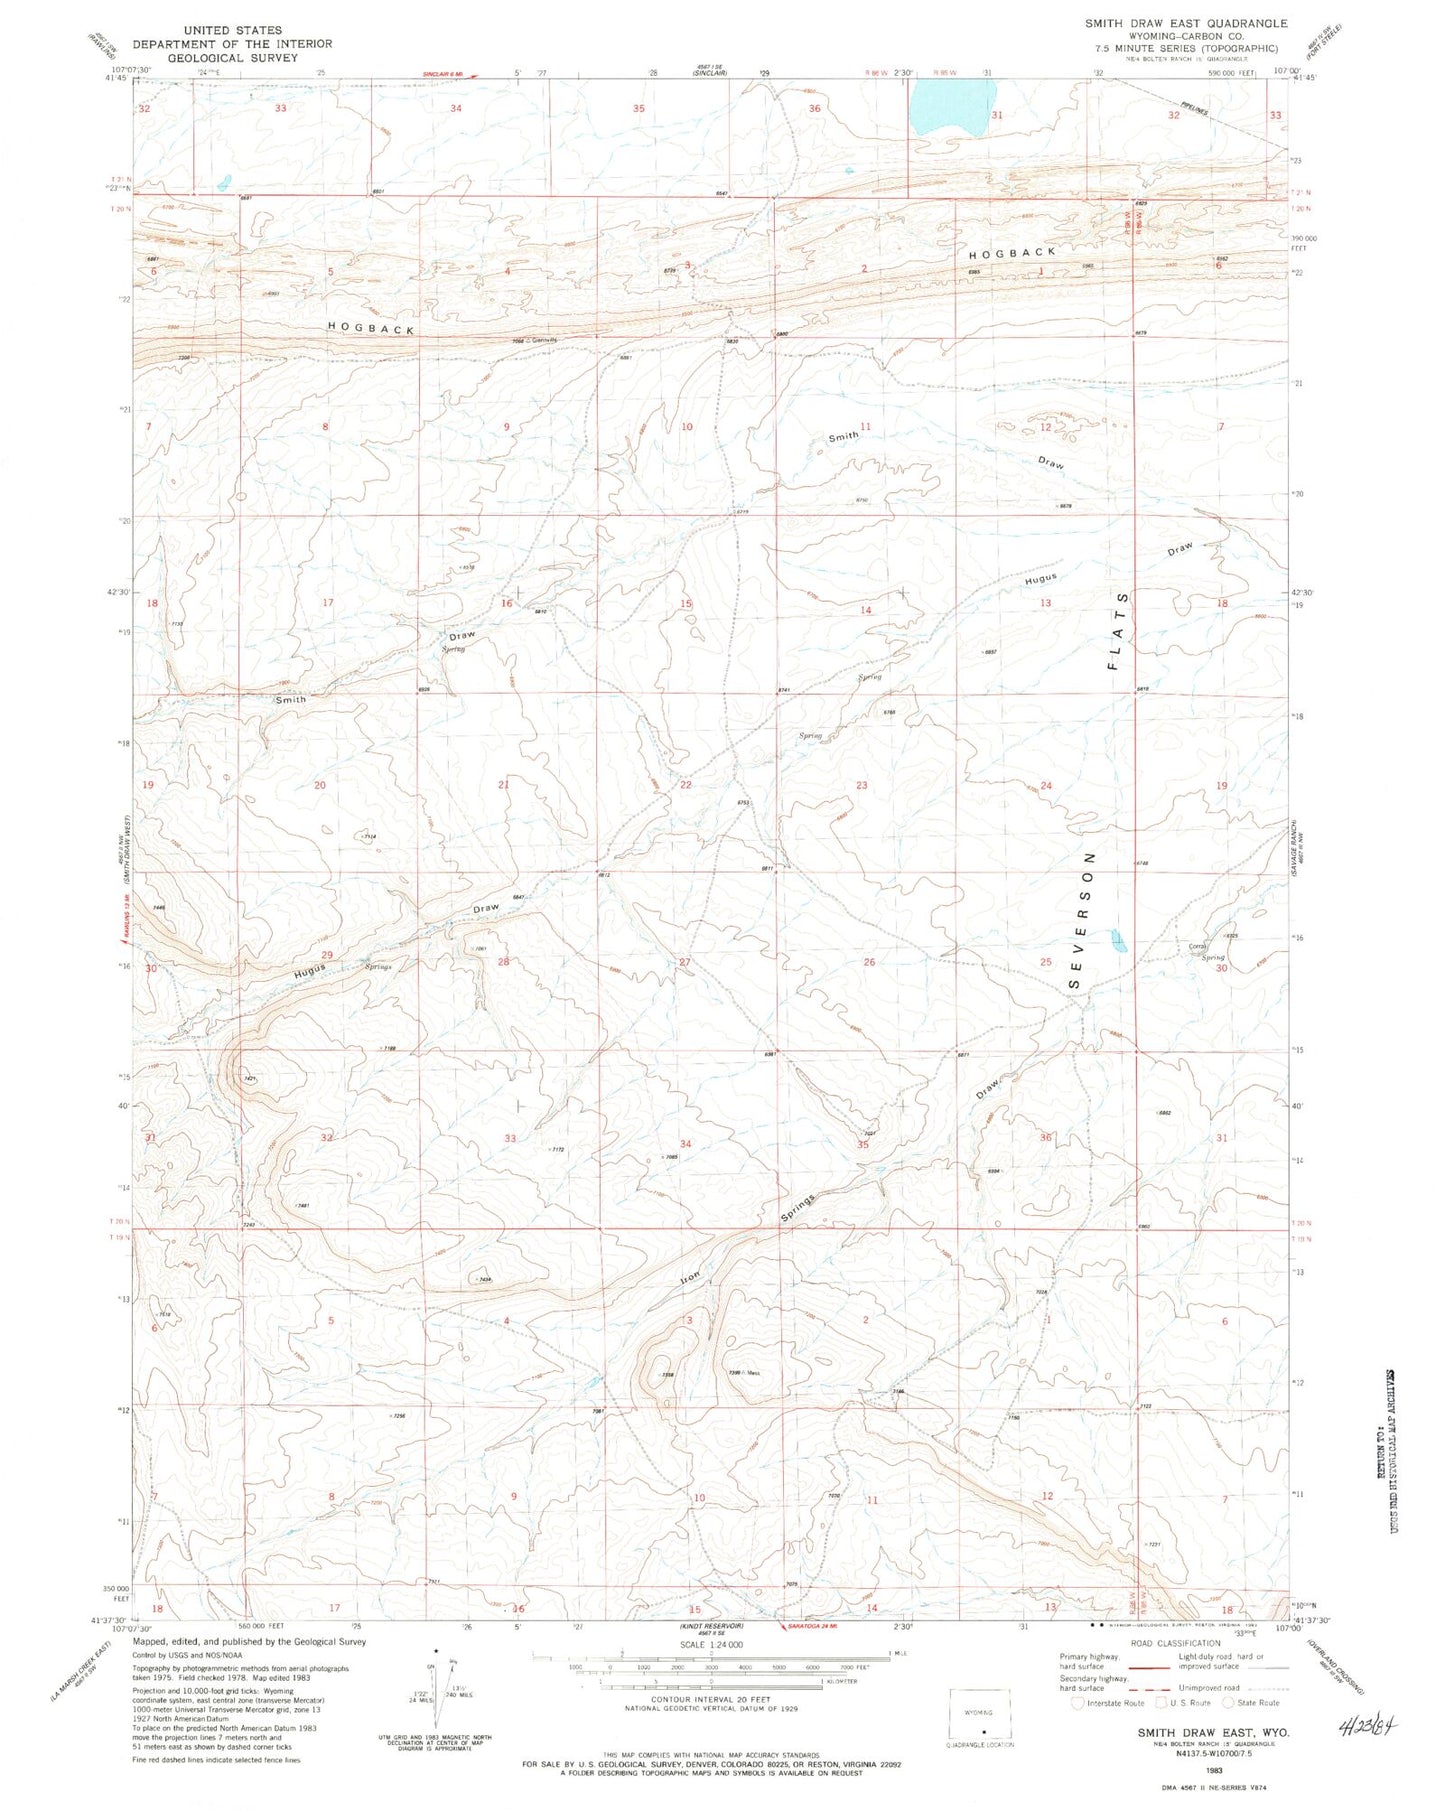 Classic USGS Smith Draw East Wyoming 7.5'x7.5' Topo Map Image